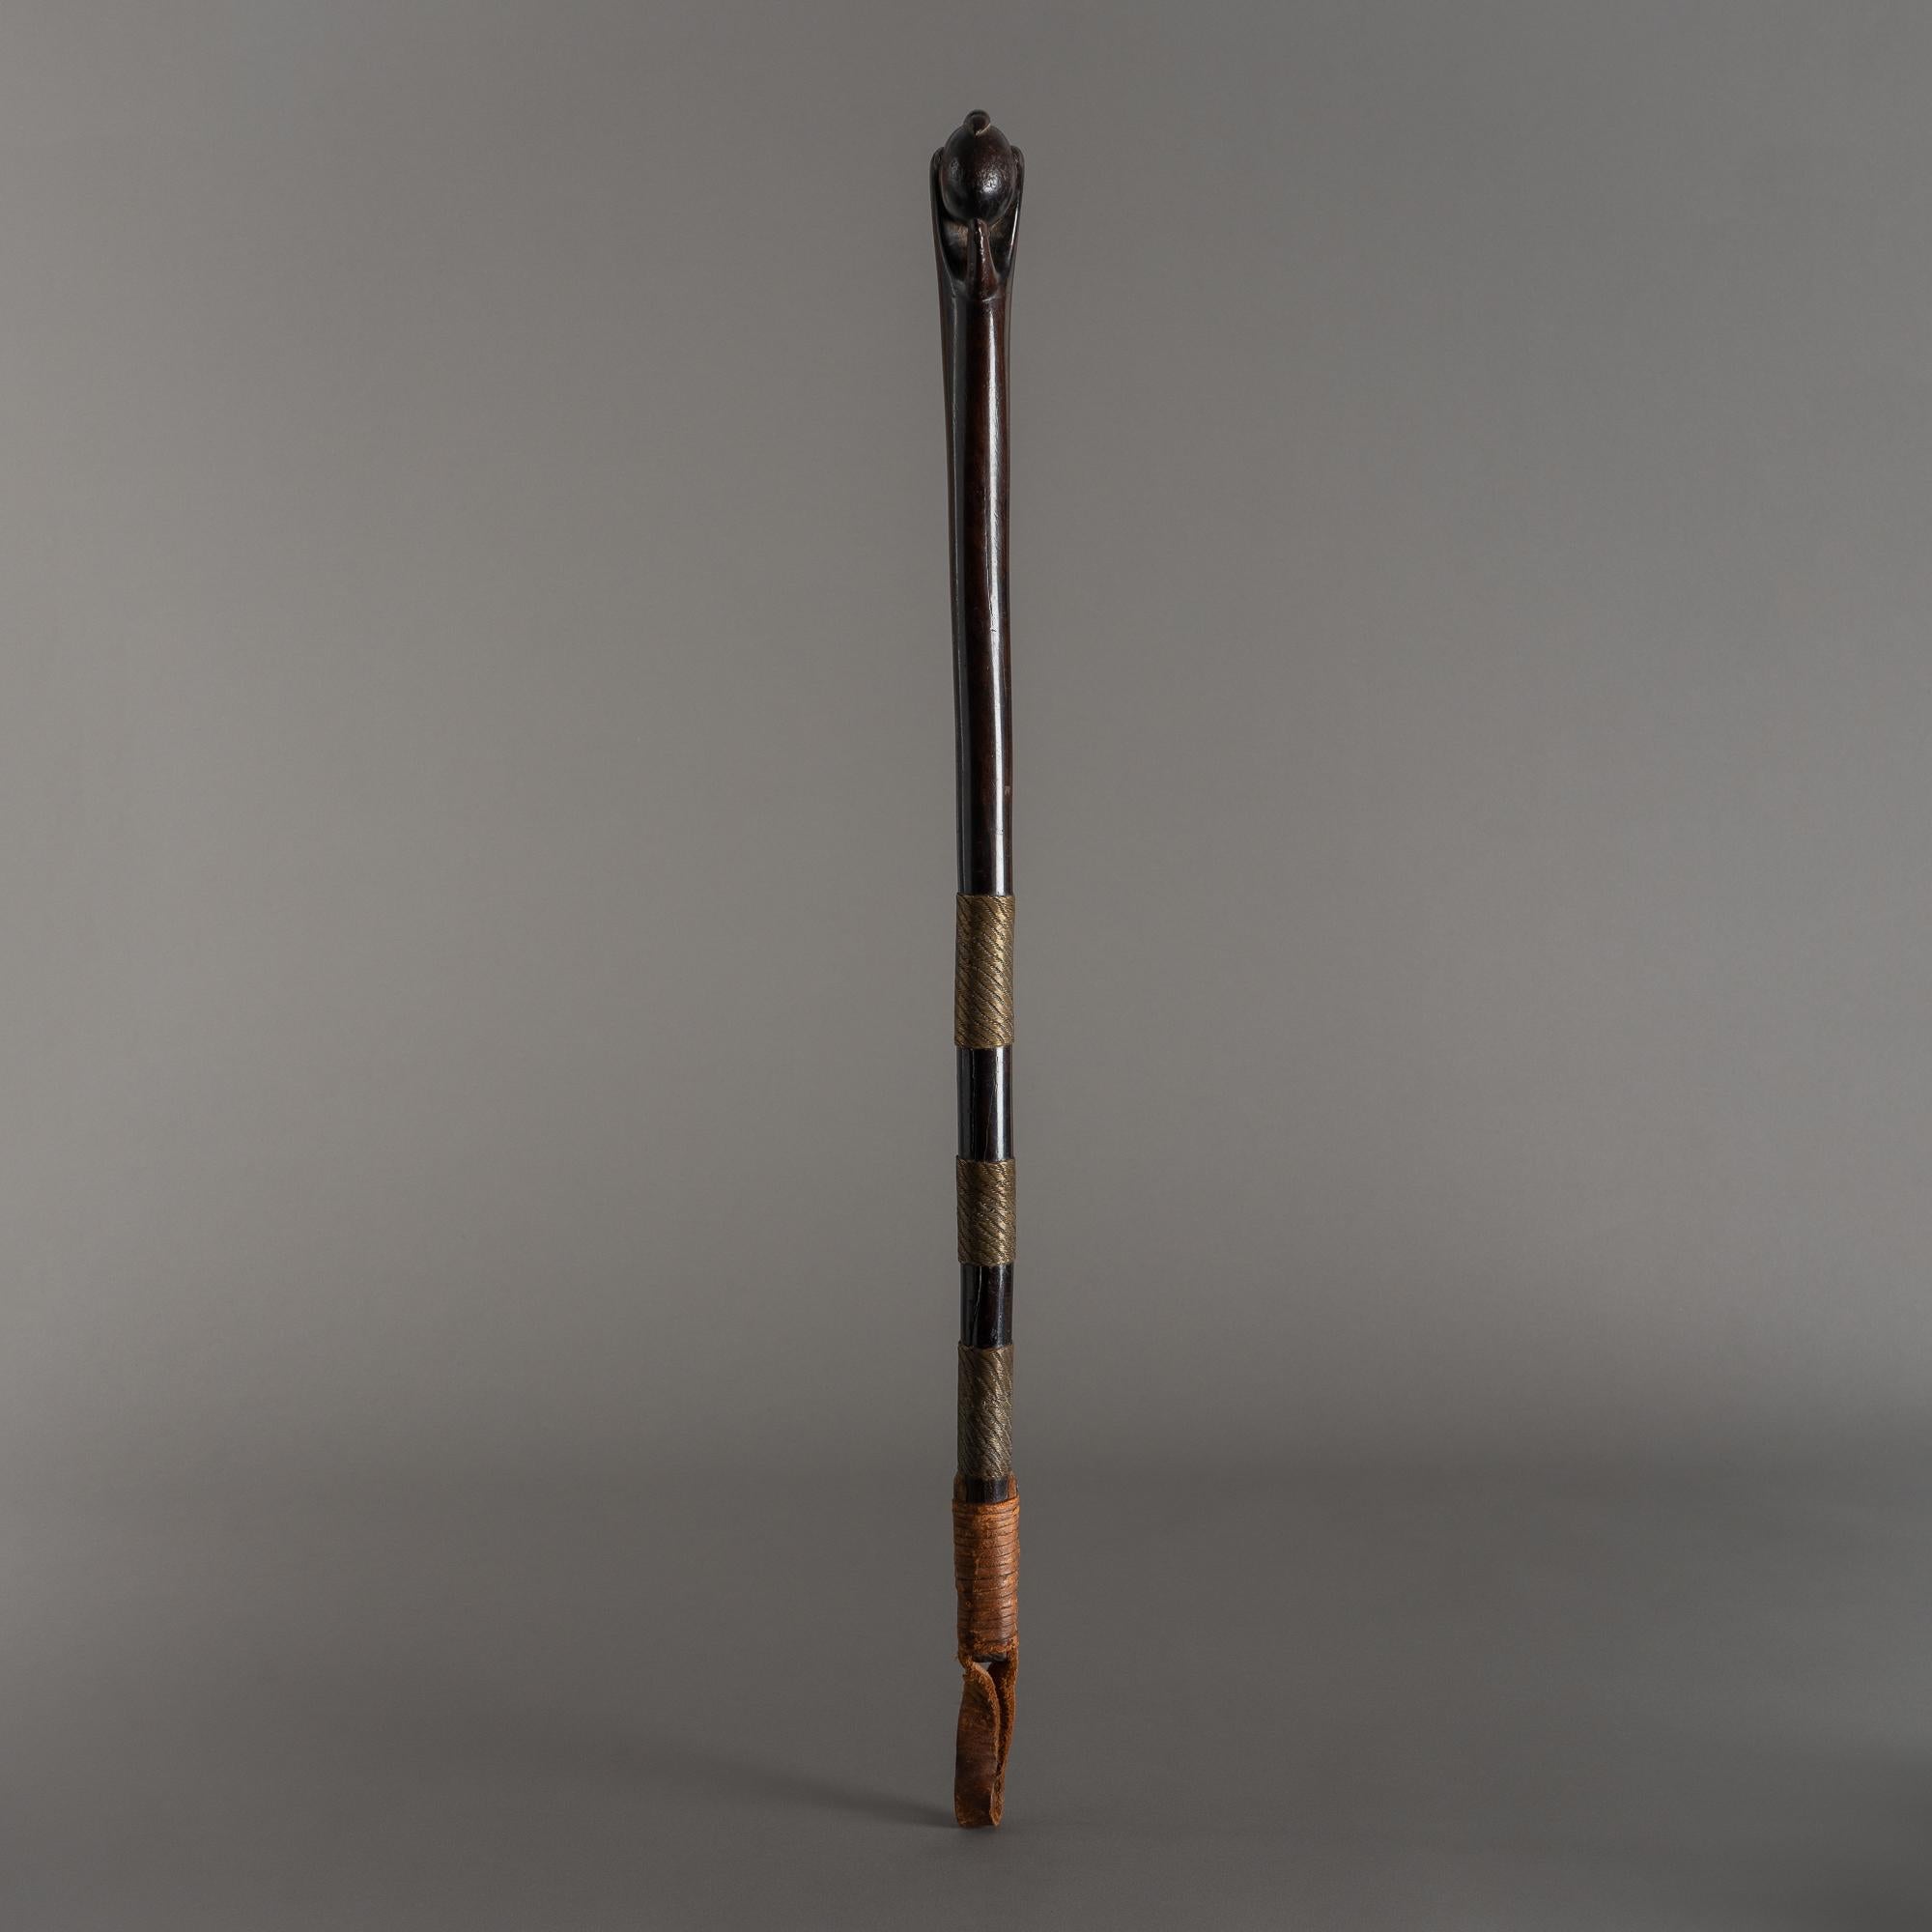 This artfully carved hardwood stick features a four-fingered claw grasping an egg, symbolizing the fragile and somewhat mysterious nature of life. Graced with a dark patina, the shaft is wrapped with three wide bands of dense brass wirework,